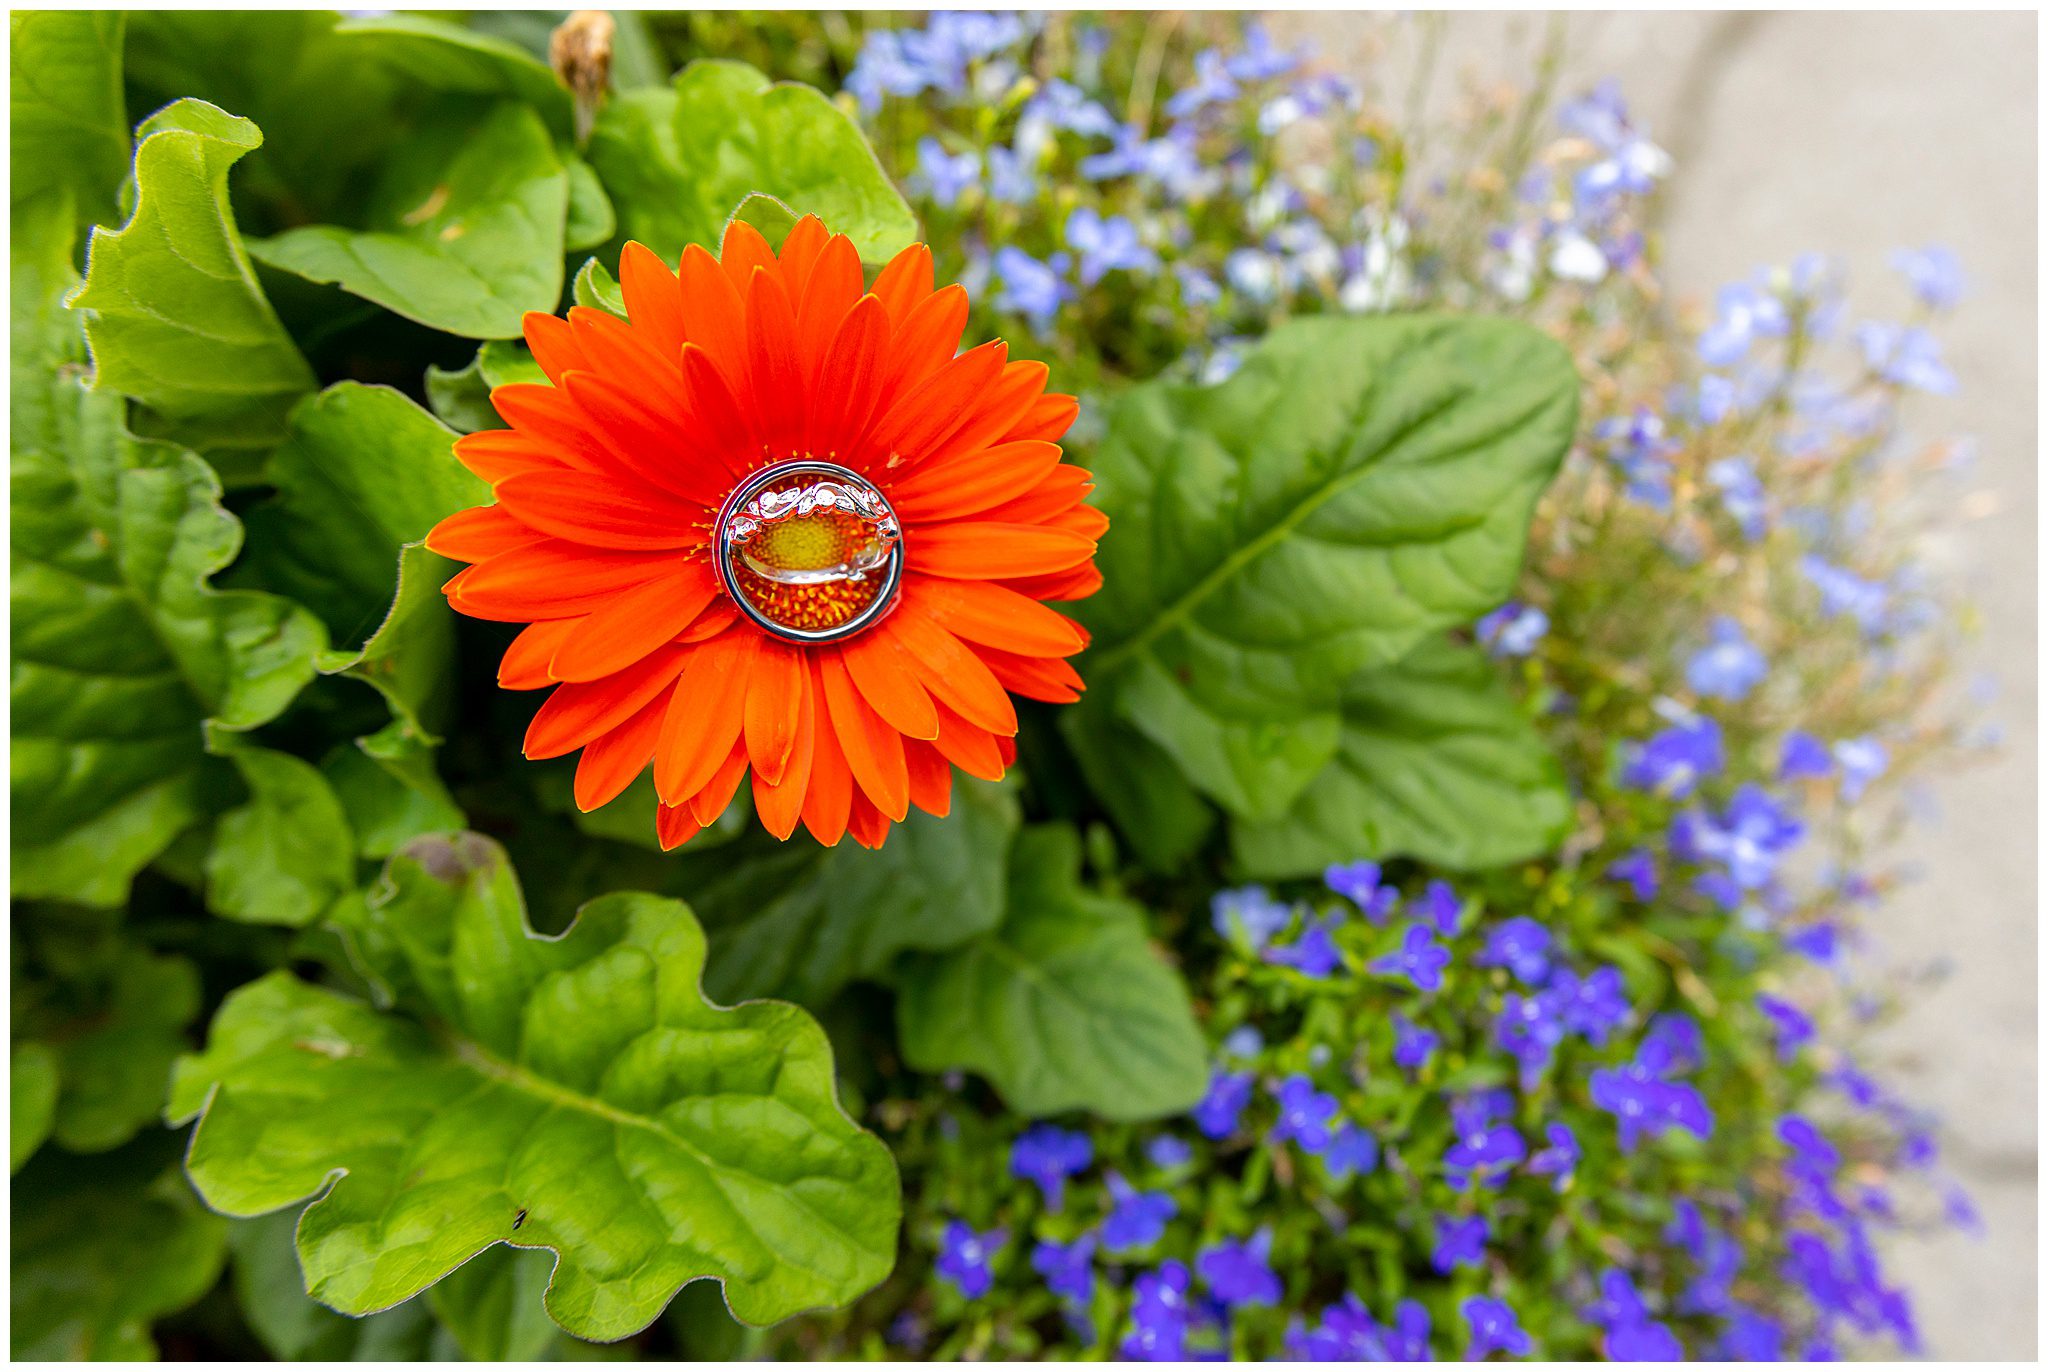 husband and wife wedding bands sit in the middle of a bright red flower in a garden